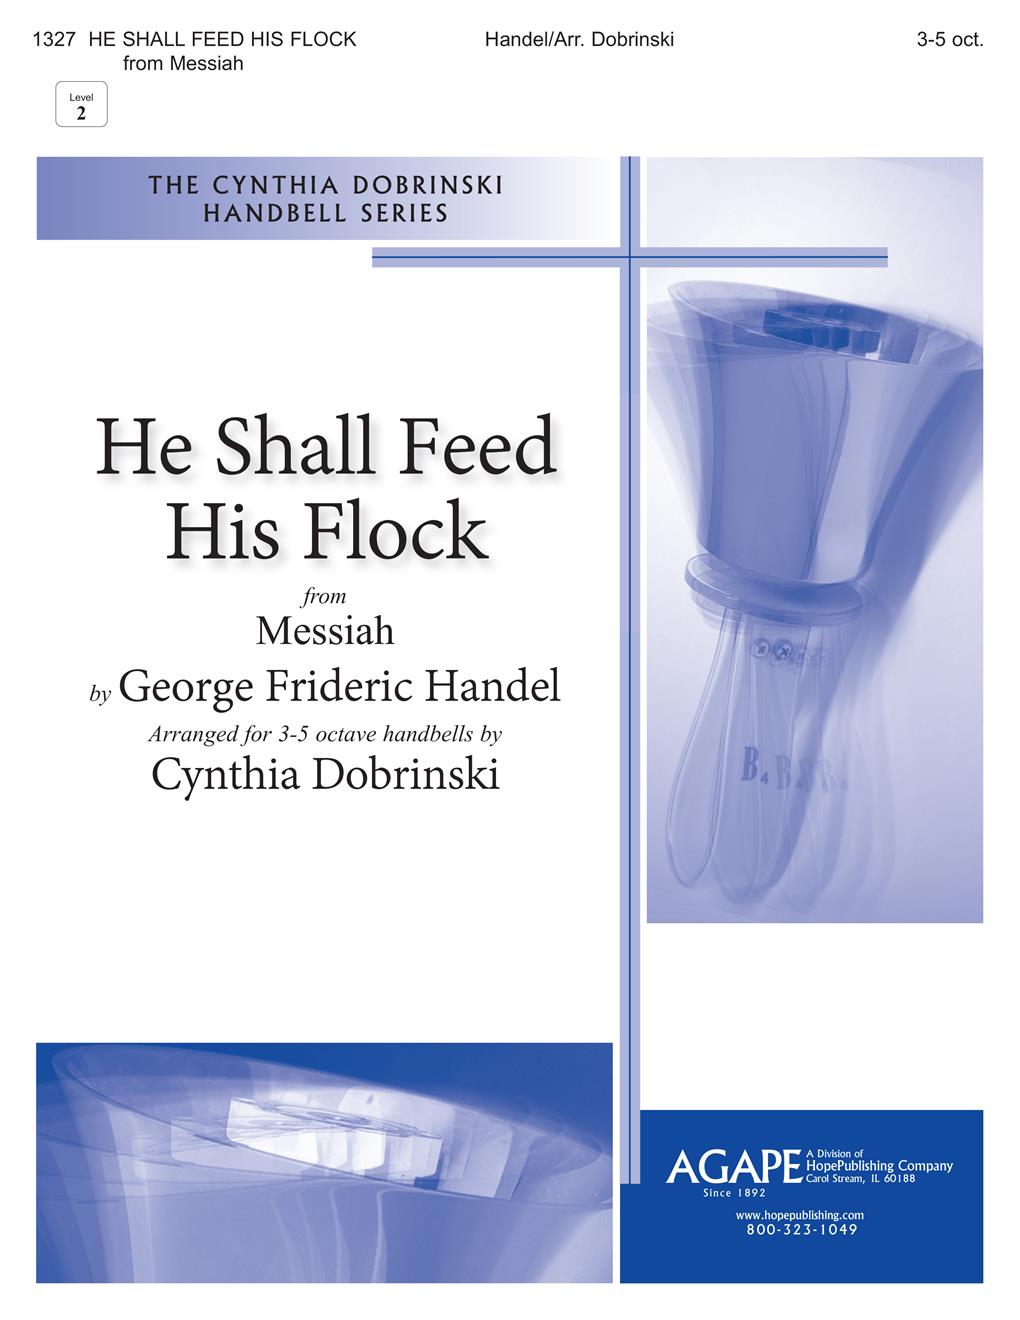 He Shall Feed His Flock - 3-5 Oct. Cover Image